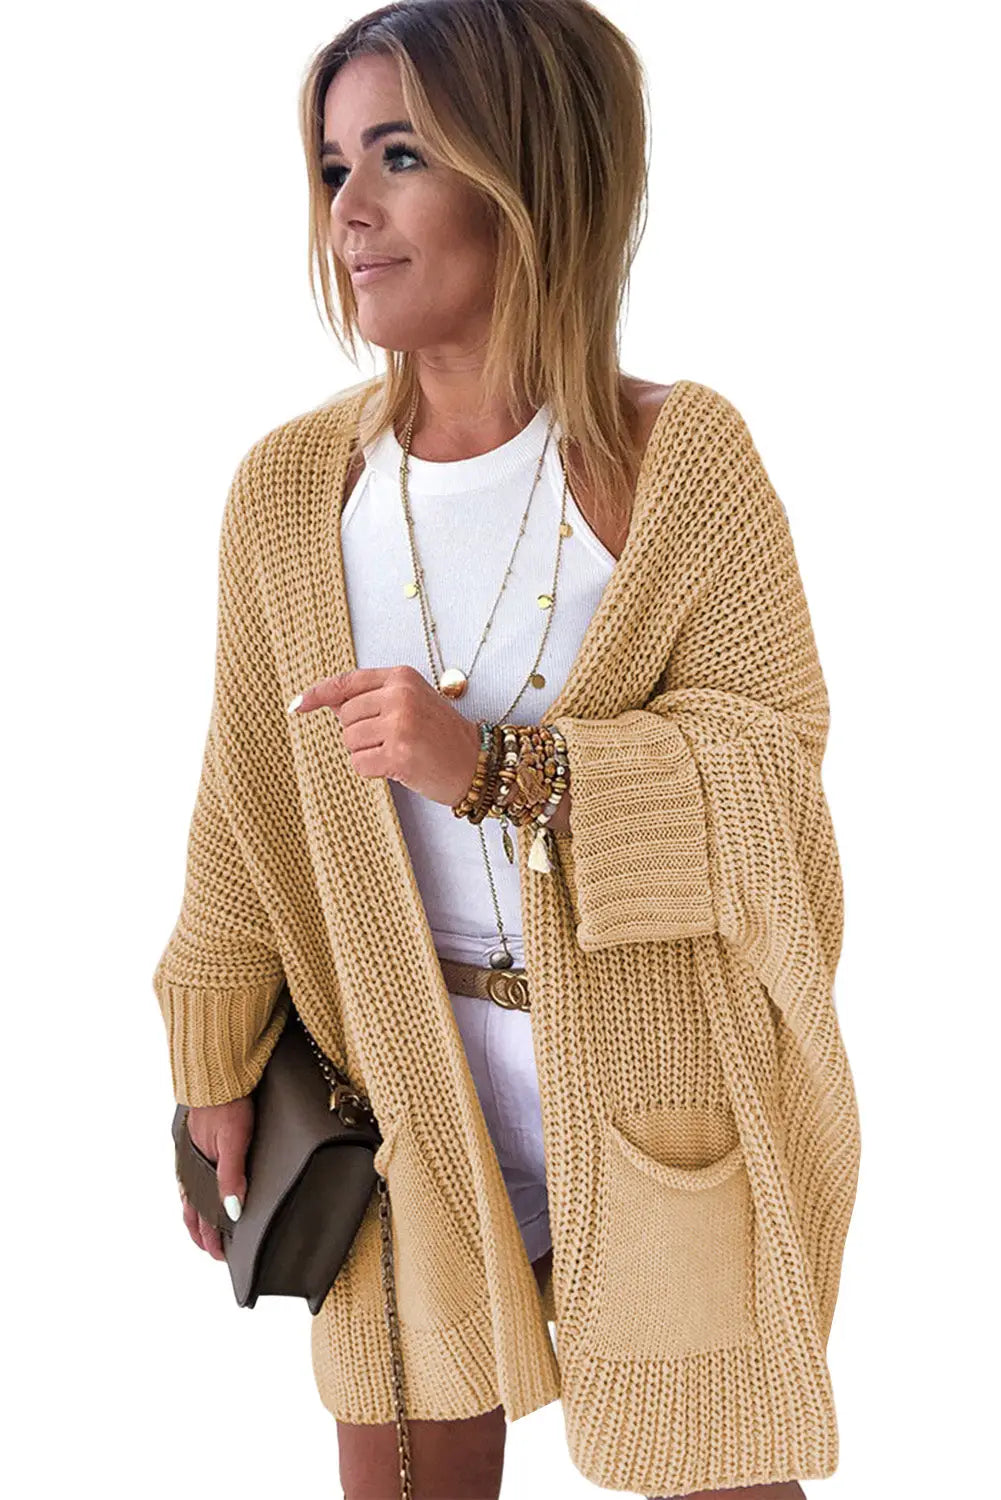 Apricot oversized fold over sleeve sweater cardigan - tops